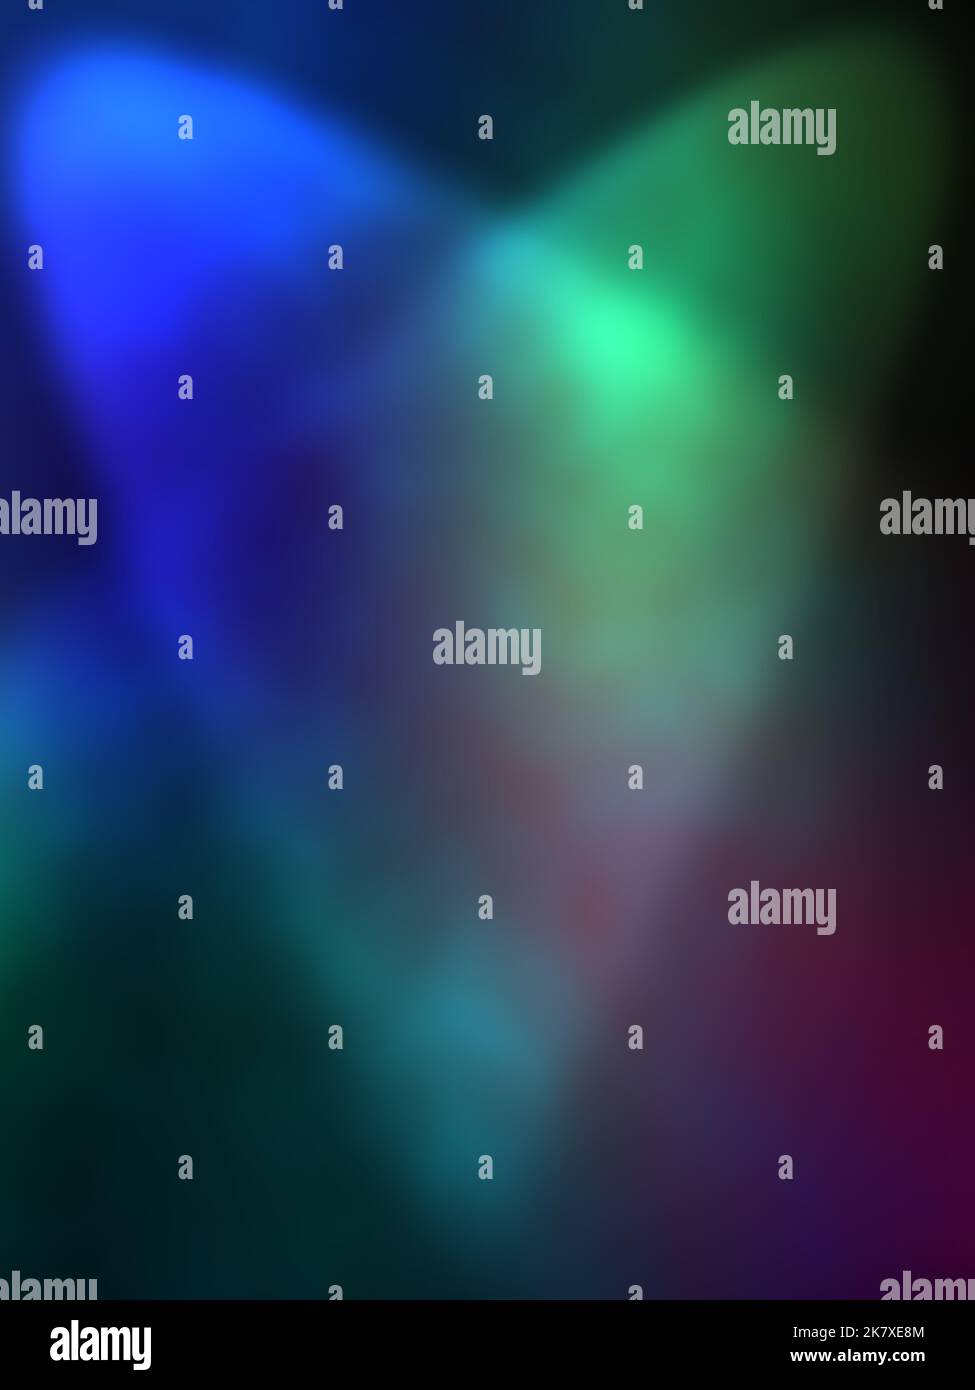 Blue and green spot light beam with colored smoke background. Stock Photo